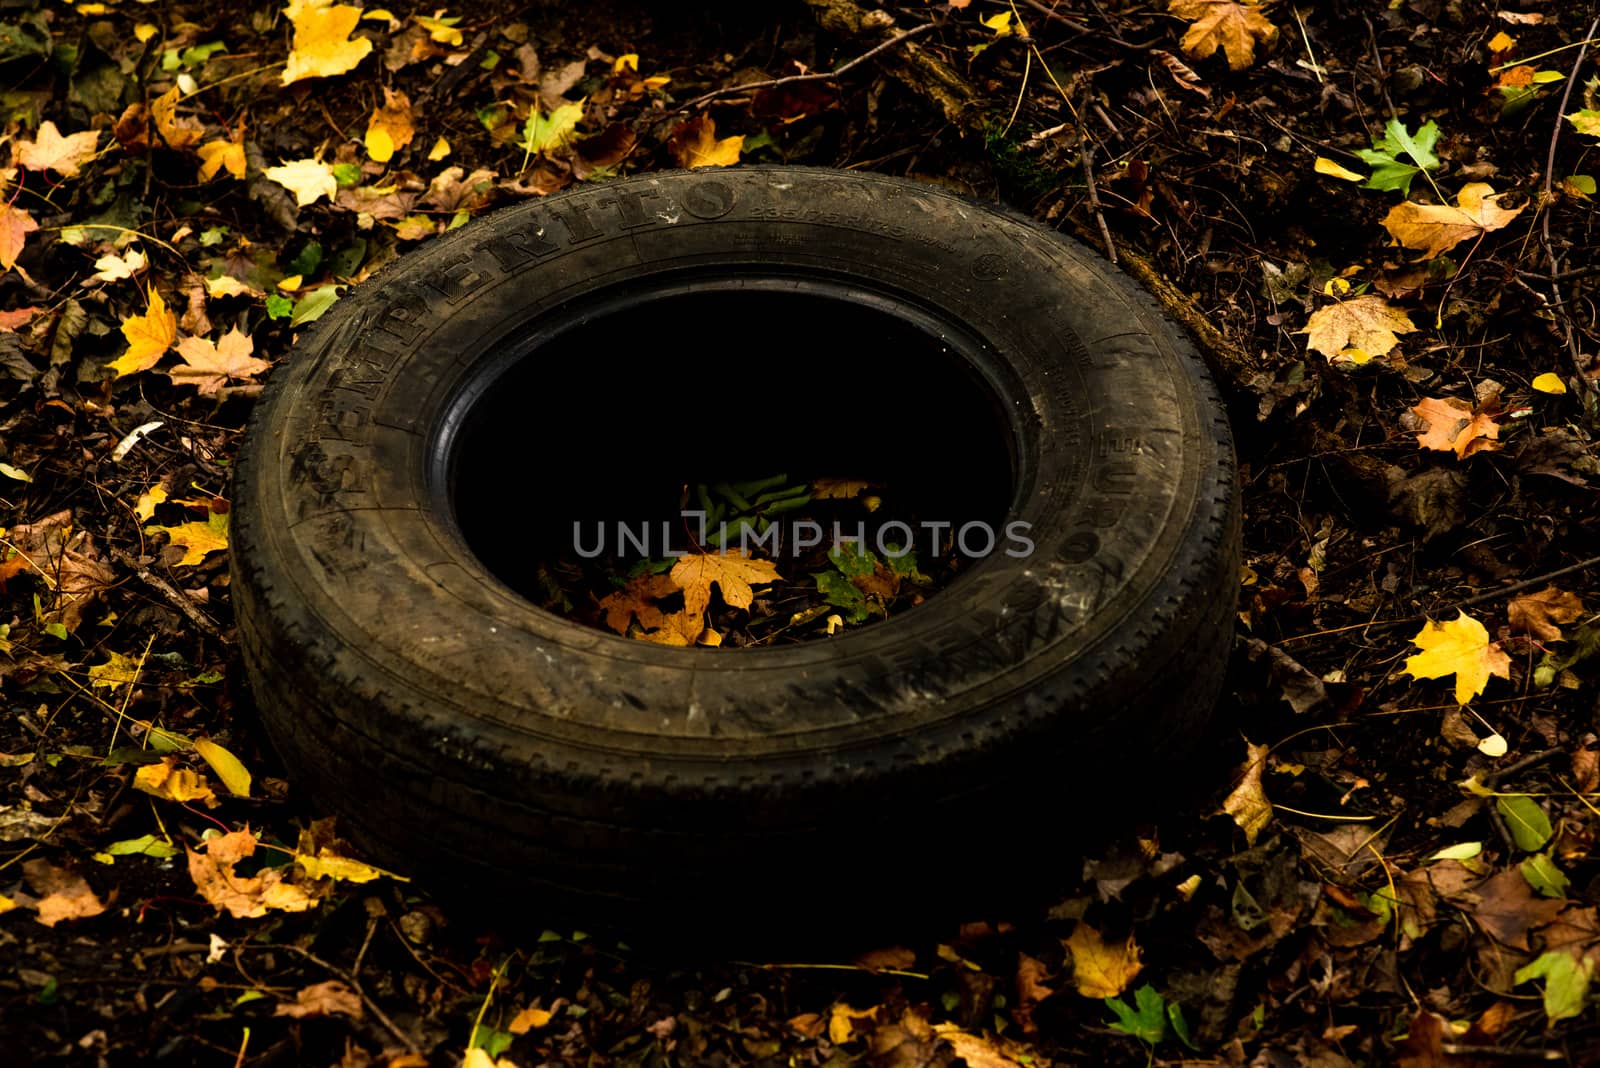 Abandoned tyre surrounded by yellow leaves on an Autumn day by gonzalobell